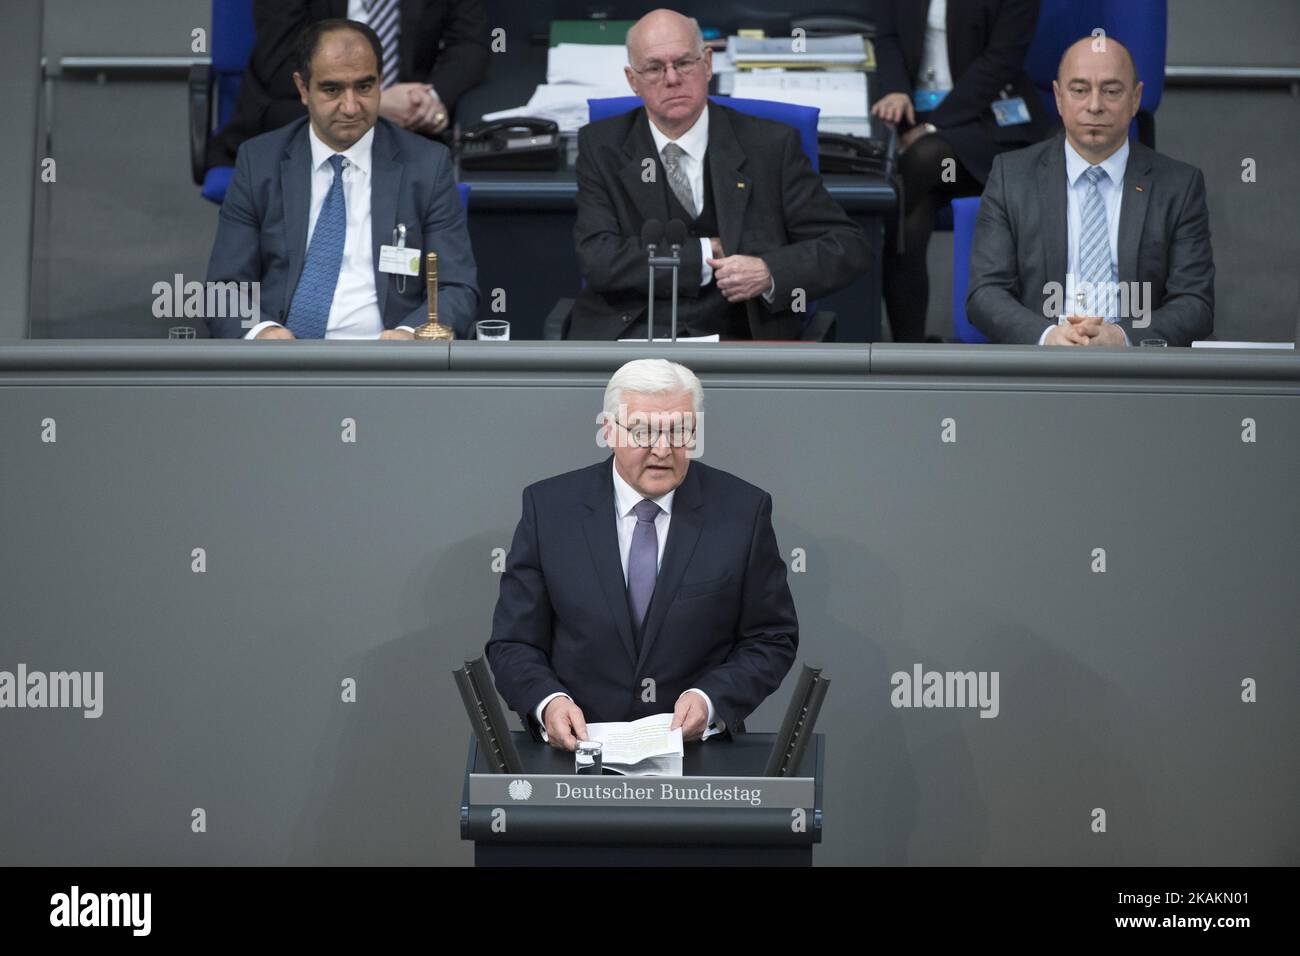 New elected German President Frank-Walter Steinmeier (C) holds a speach after his election by the Bundesversammlung (Federal Assembly) at the Reichstag in Berlin, Germany on February 12, 2017. Steinmeier, 61, obtained 931 votes out of 1,260 being the official candidate of the government parties CDU/CSU and SPD and supported from FDP and Green party, against poverty researcher Christoph Butterwegge, nominated by the left party Die Linke and Albrecht Glaser, nominated by the far right party AfD (Alternative for Germany). (Photo by Emmanuele Contini/NurPhoto) *** Please Use Credit from Credit Fie Stock Photo